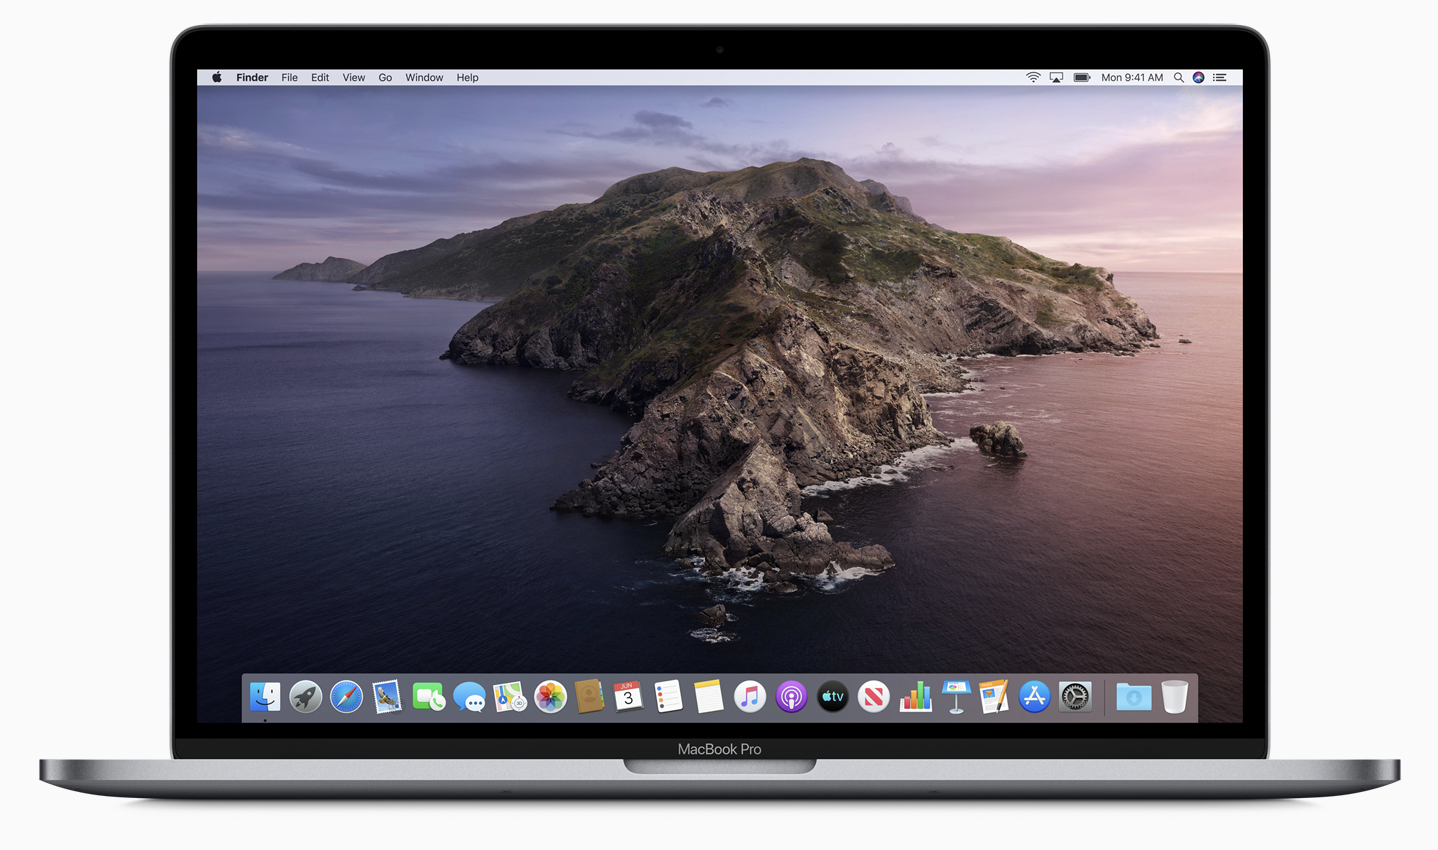 Apple posts fifth developer beta of macOS Catalina 10.15.5 (as well as some non-beta updates)